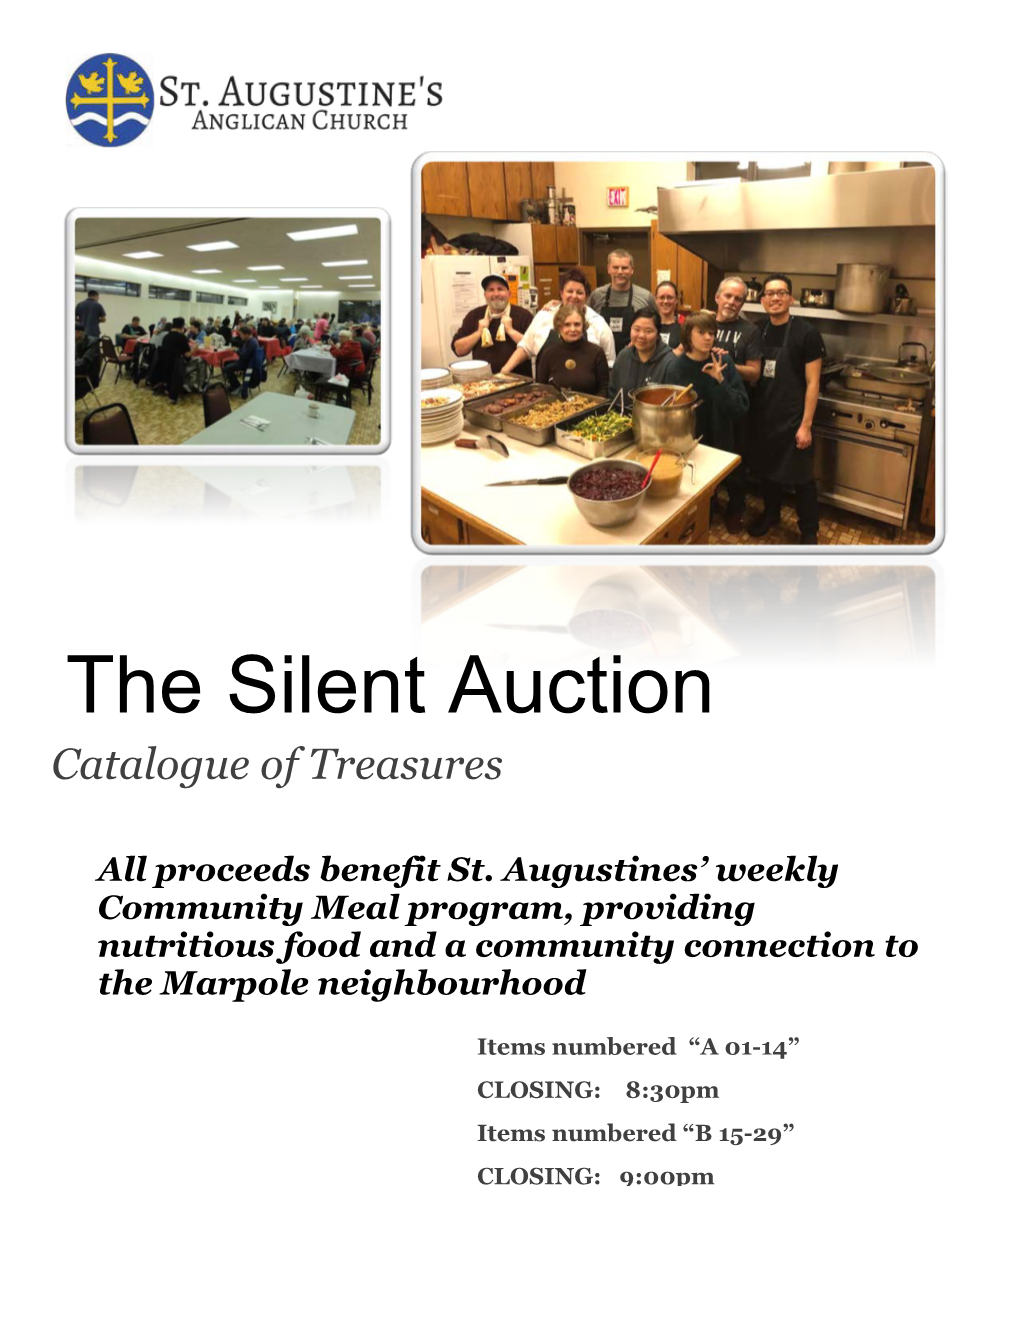 The Silent Auction Catalogue of Treasures